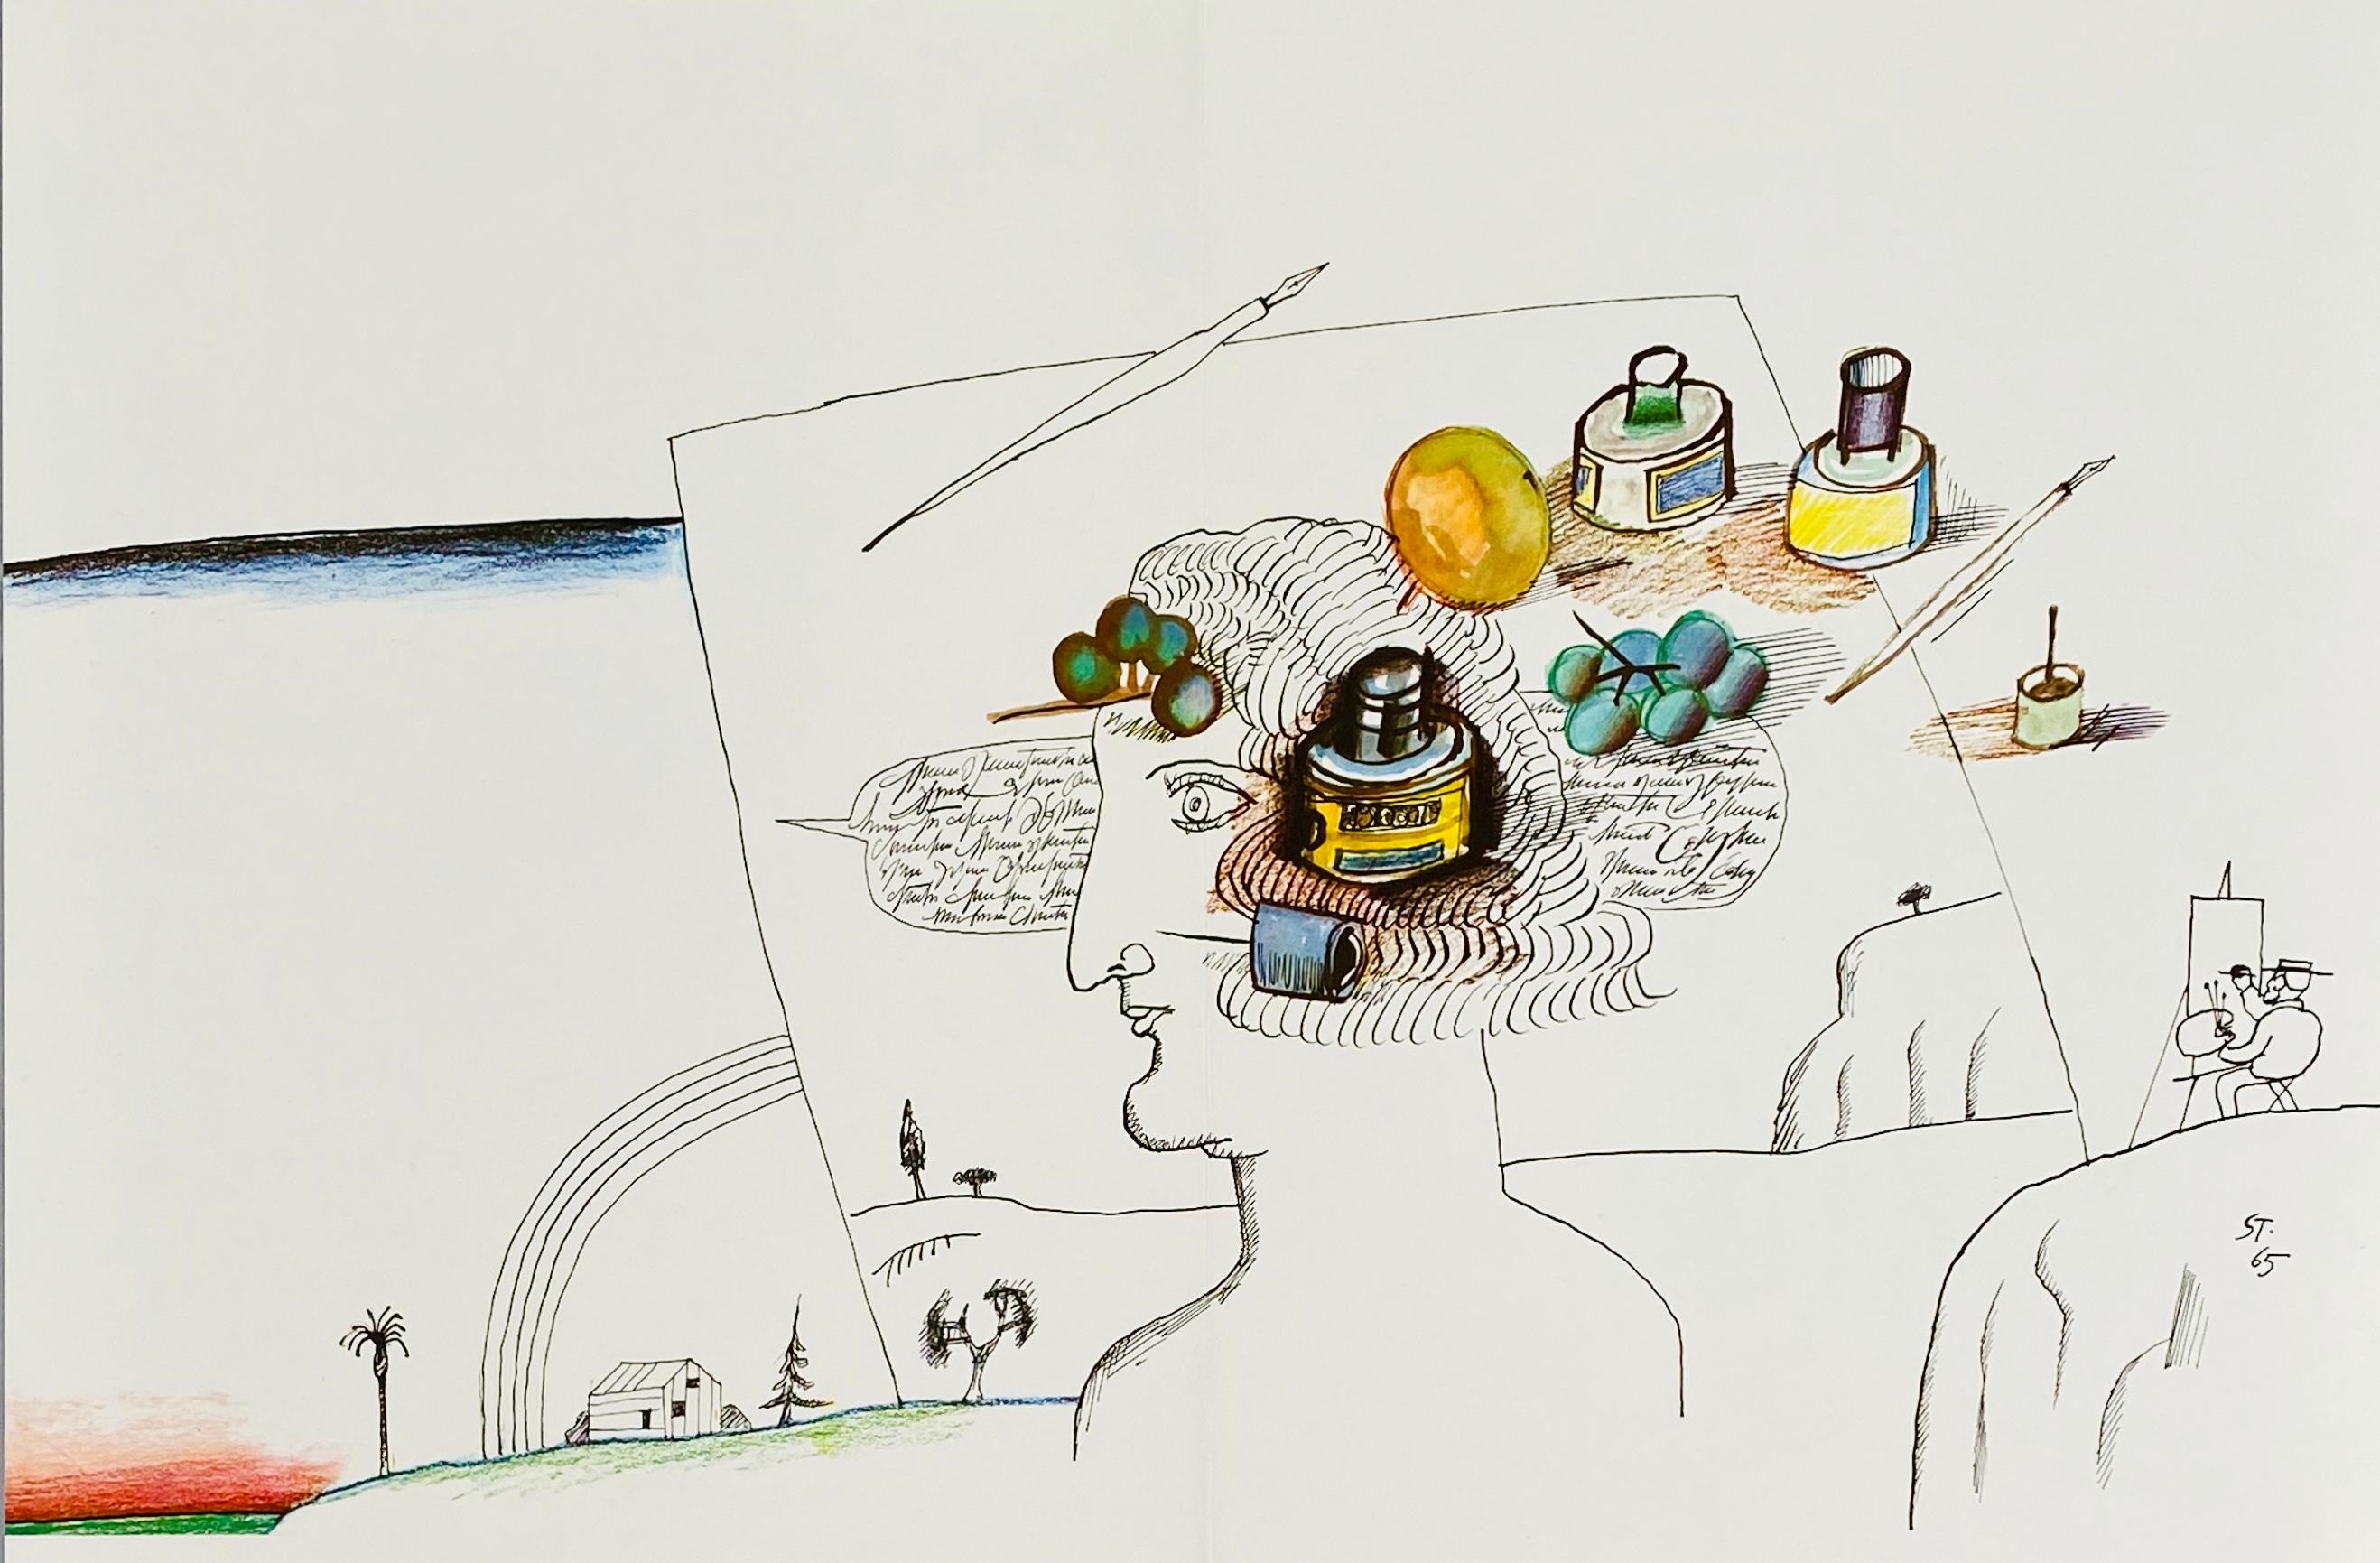 Saul Steinberg Lithograph c. 1970 from Derrière le miroir:  

Lithograph in colors; 15 x 22 inches.   Very good overall vintage condition; center gold-line as originally issued.   

Unsigned from an edition of unknown. 

From: Derrière le miroir